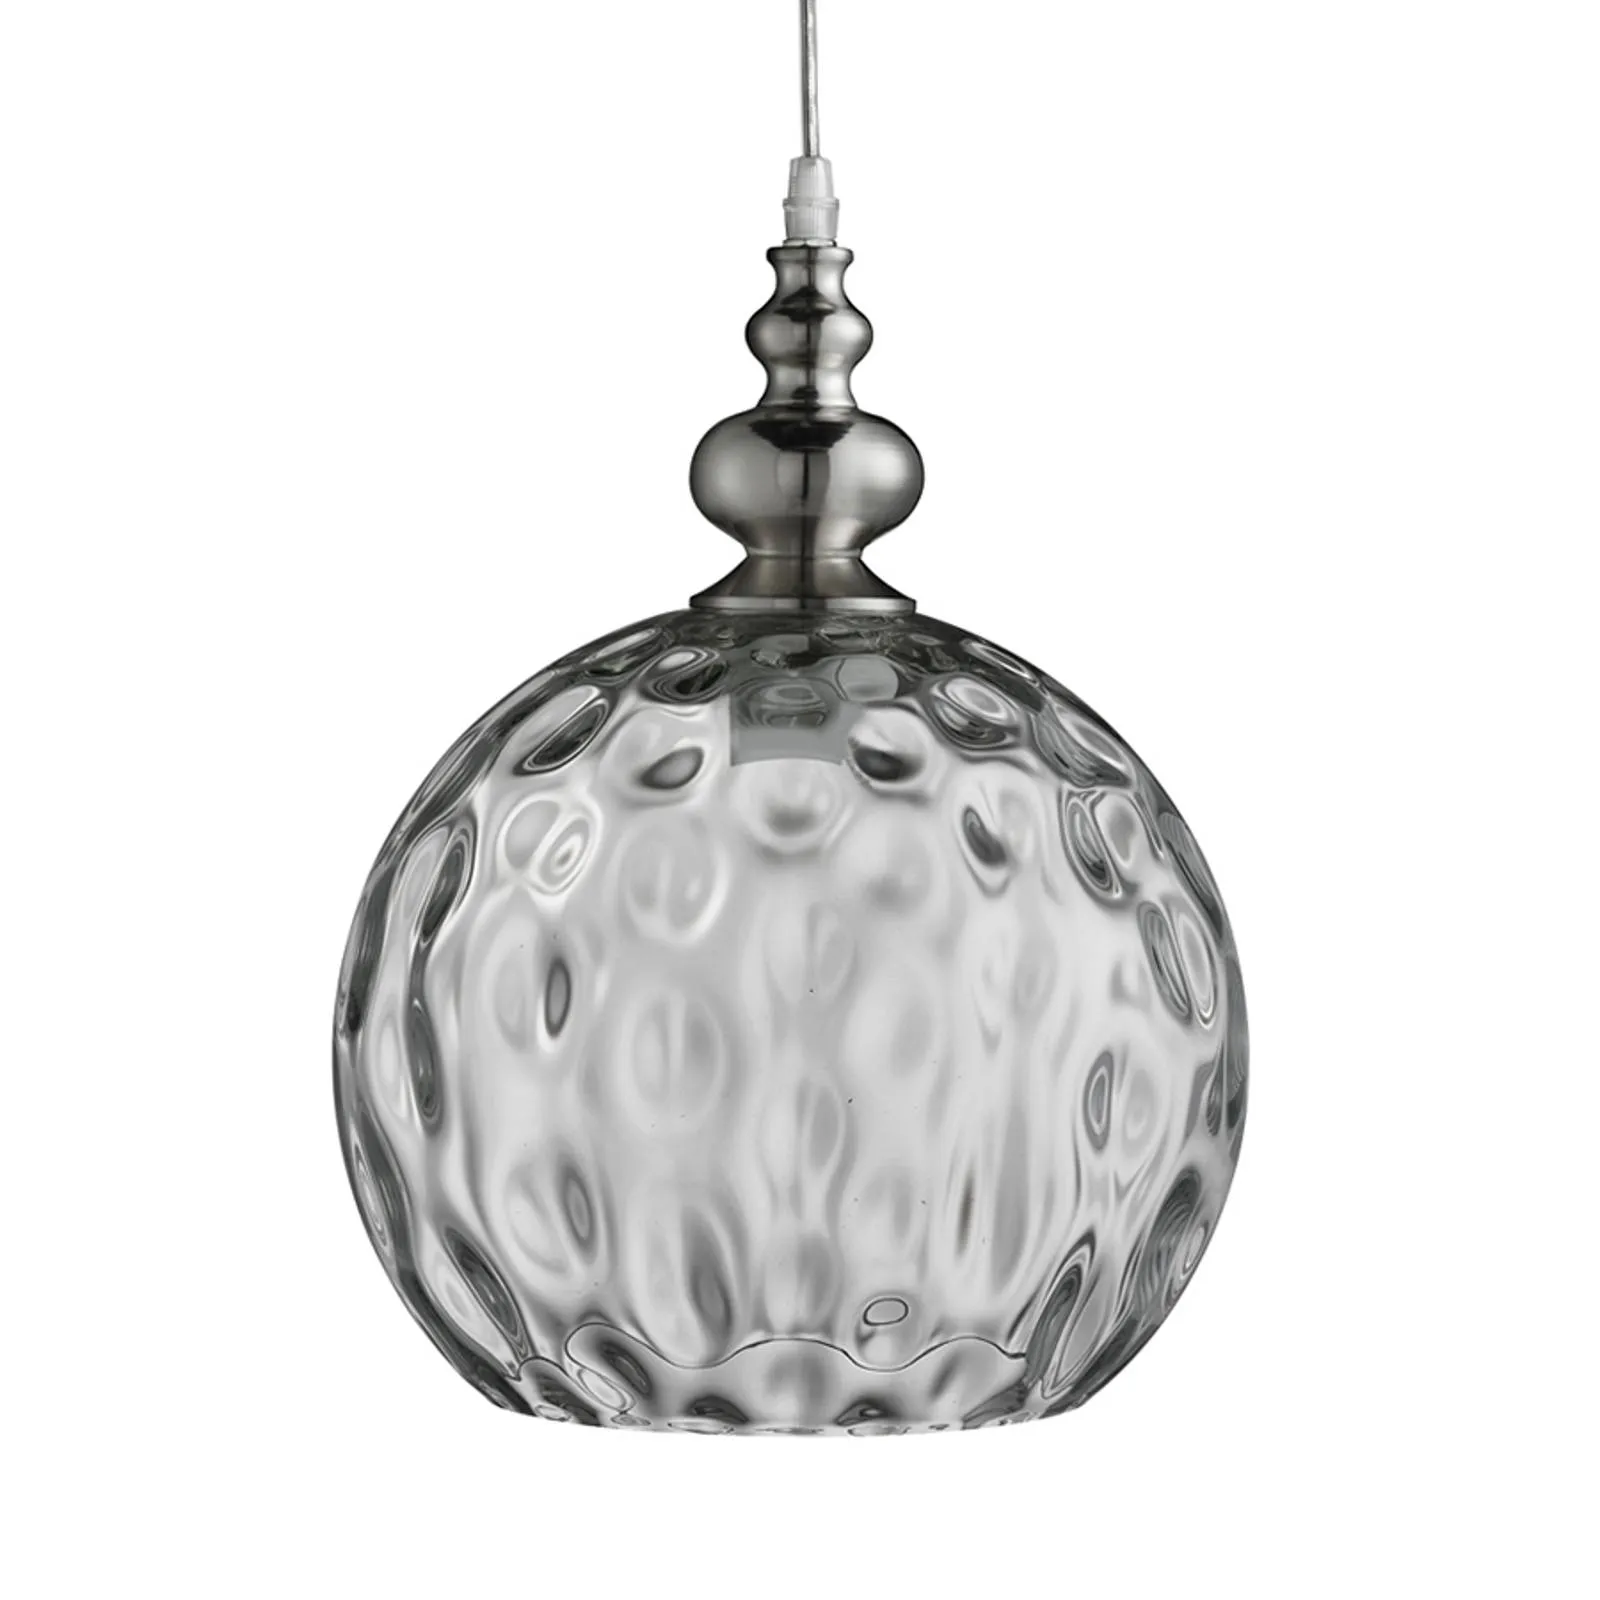 Indiana hanging light of antique design, silver